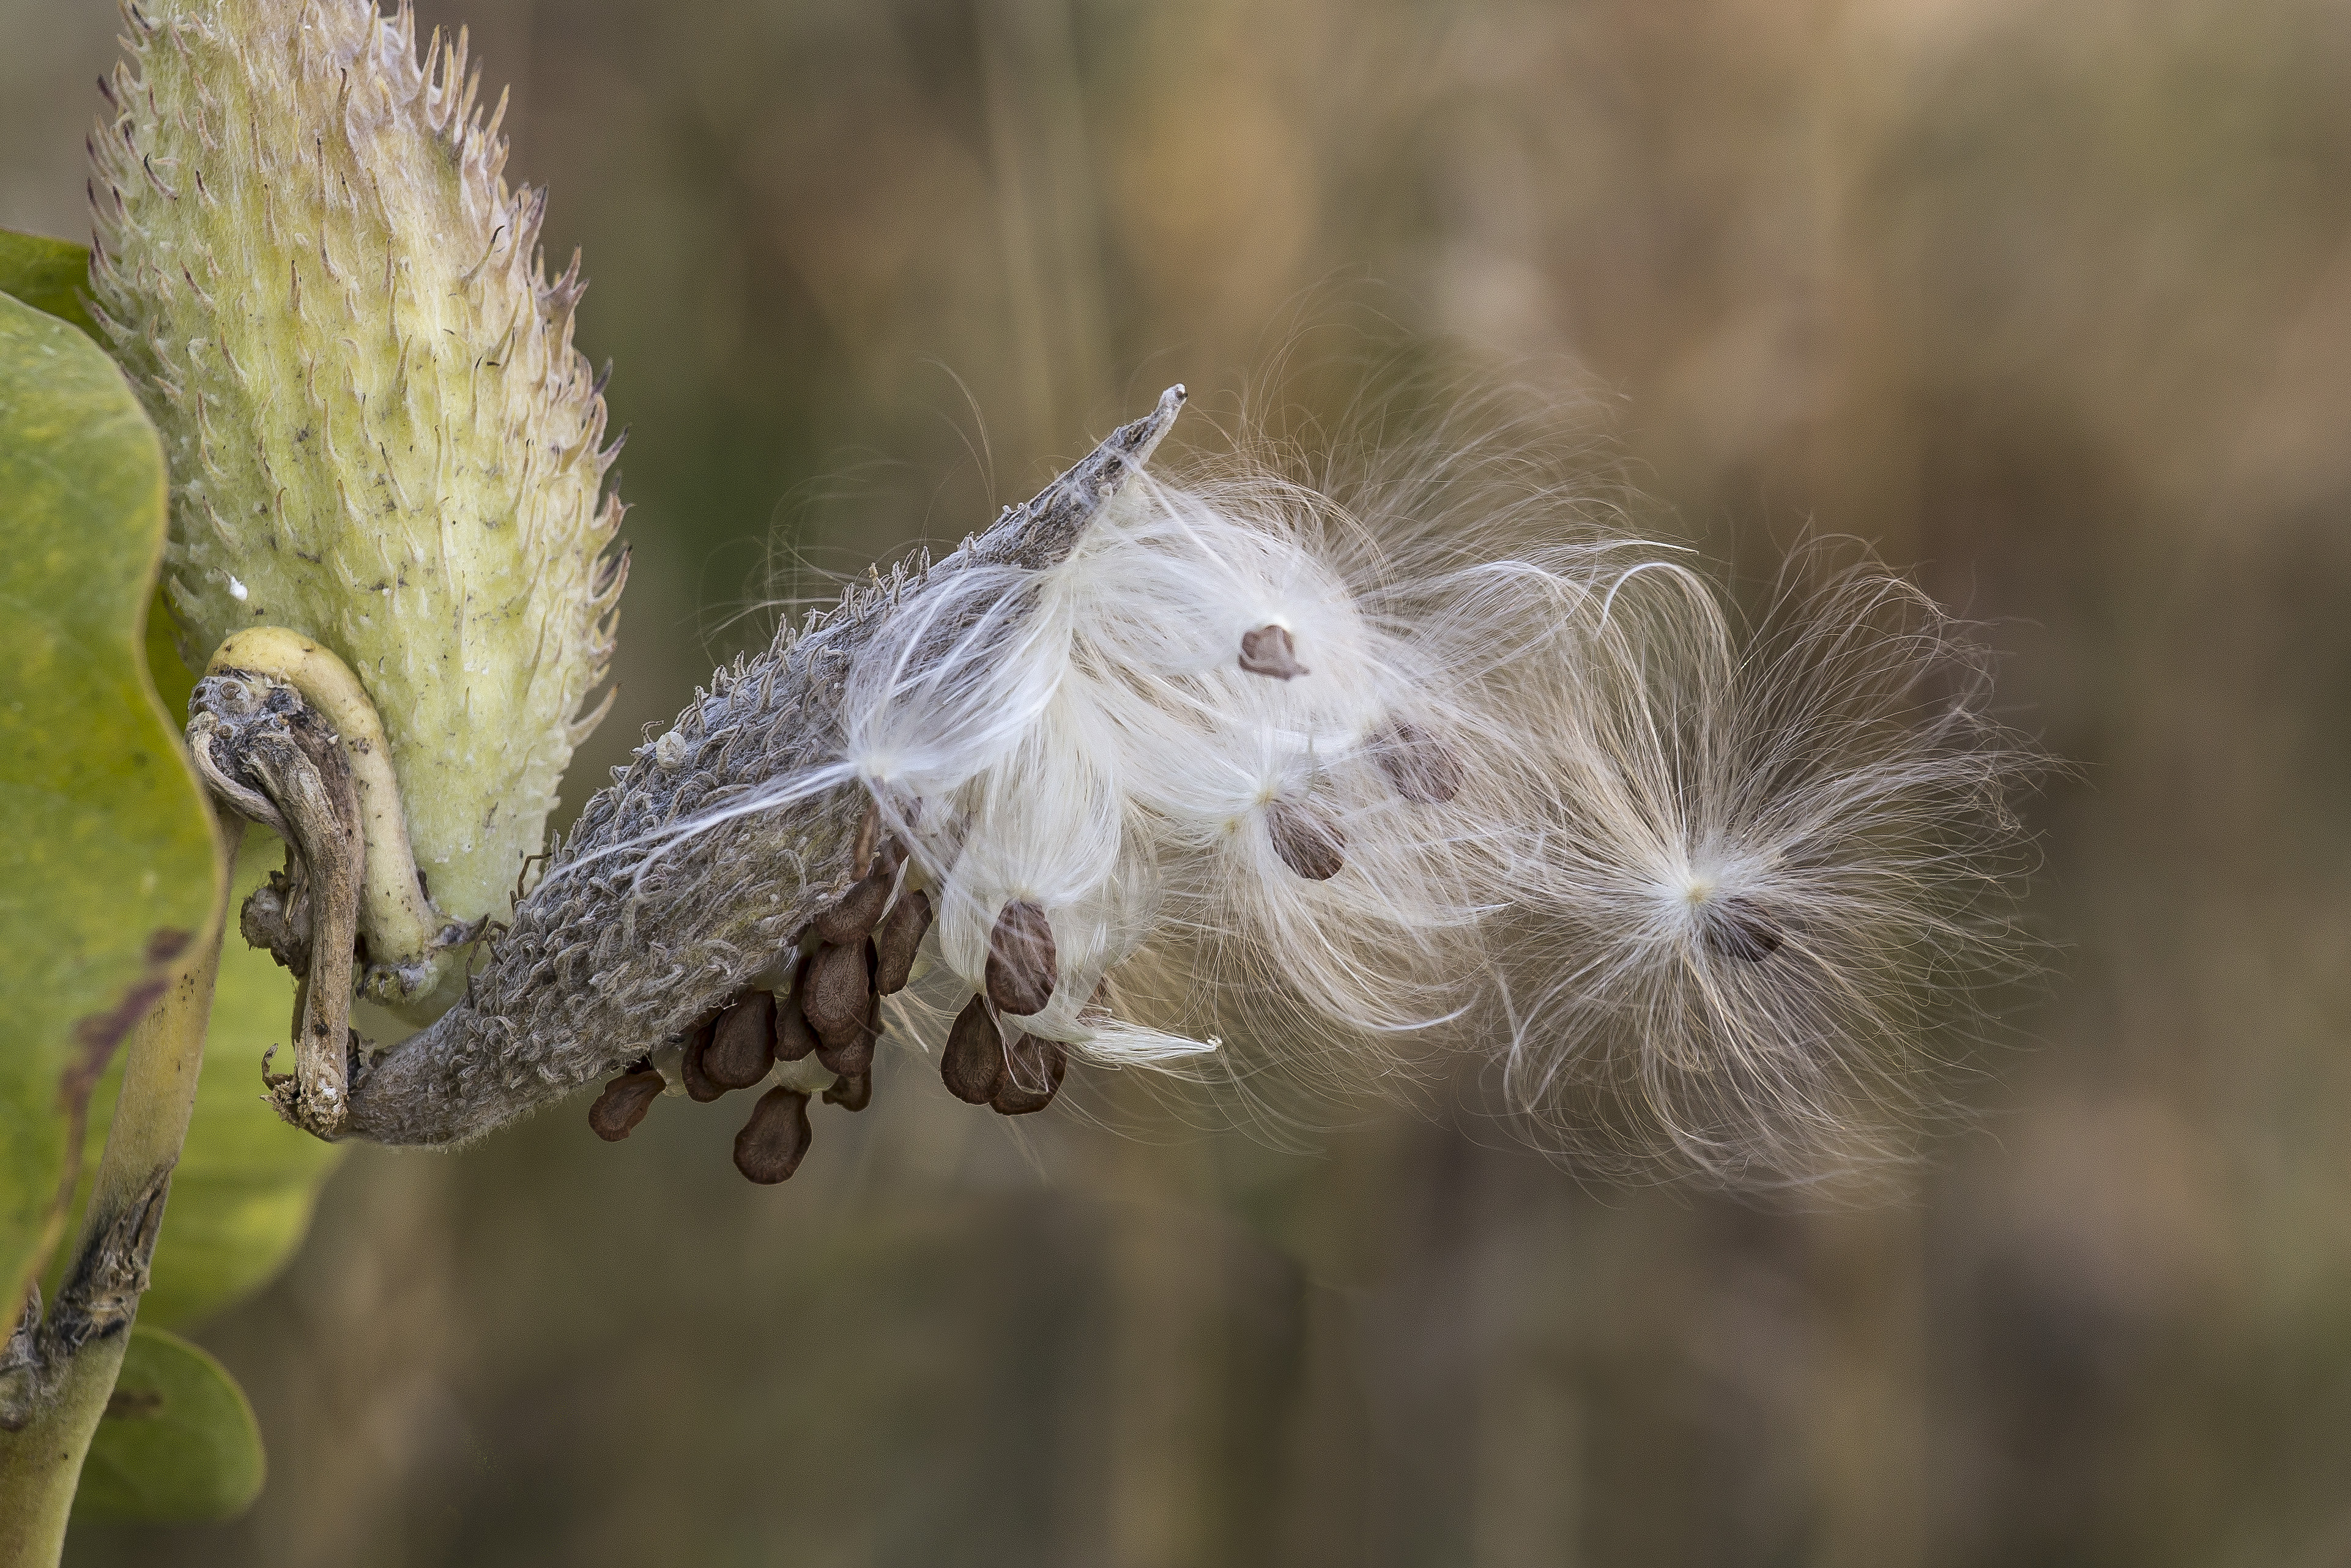 Image of Common milkweed seed pod with white hairs